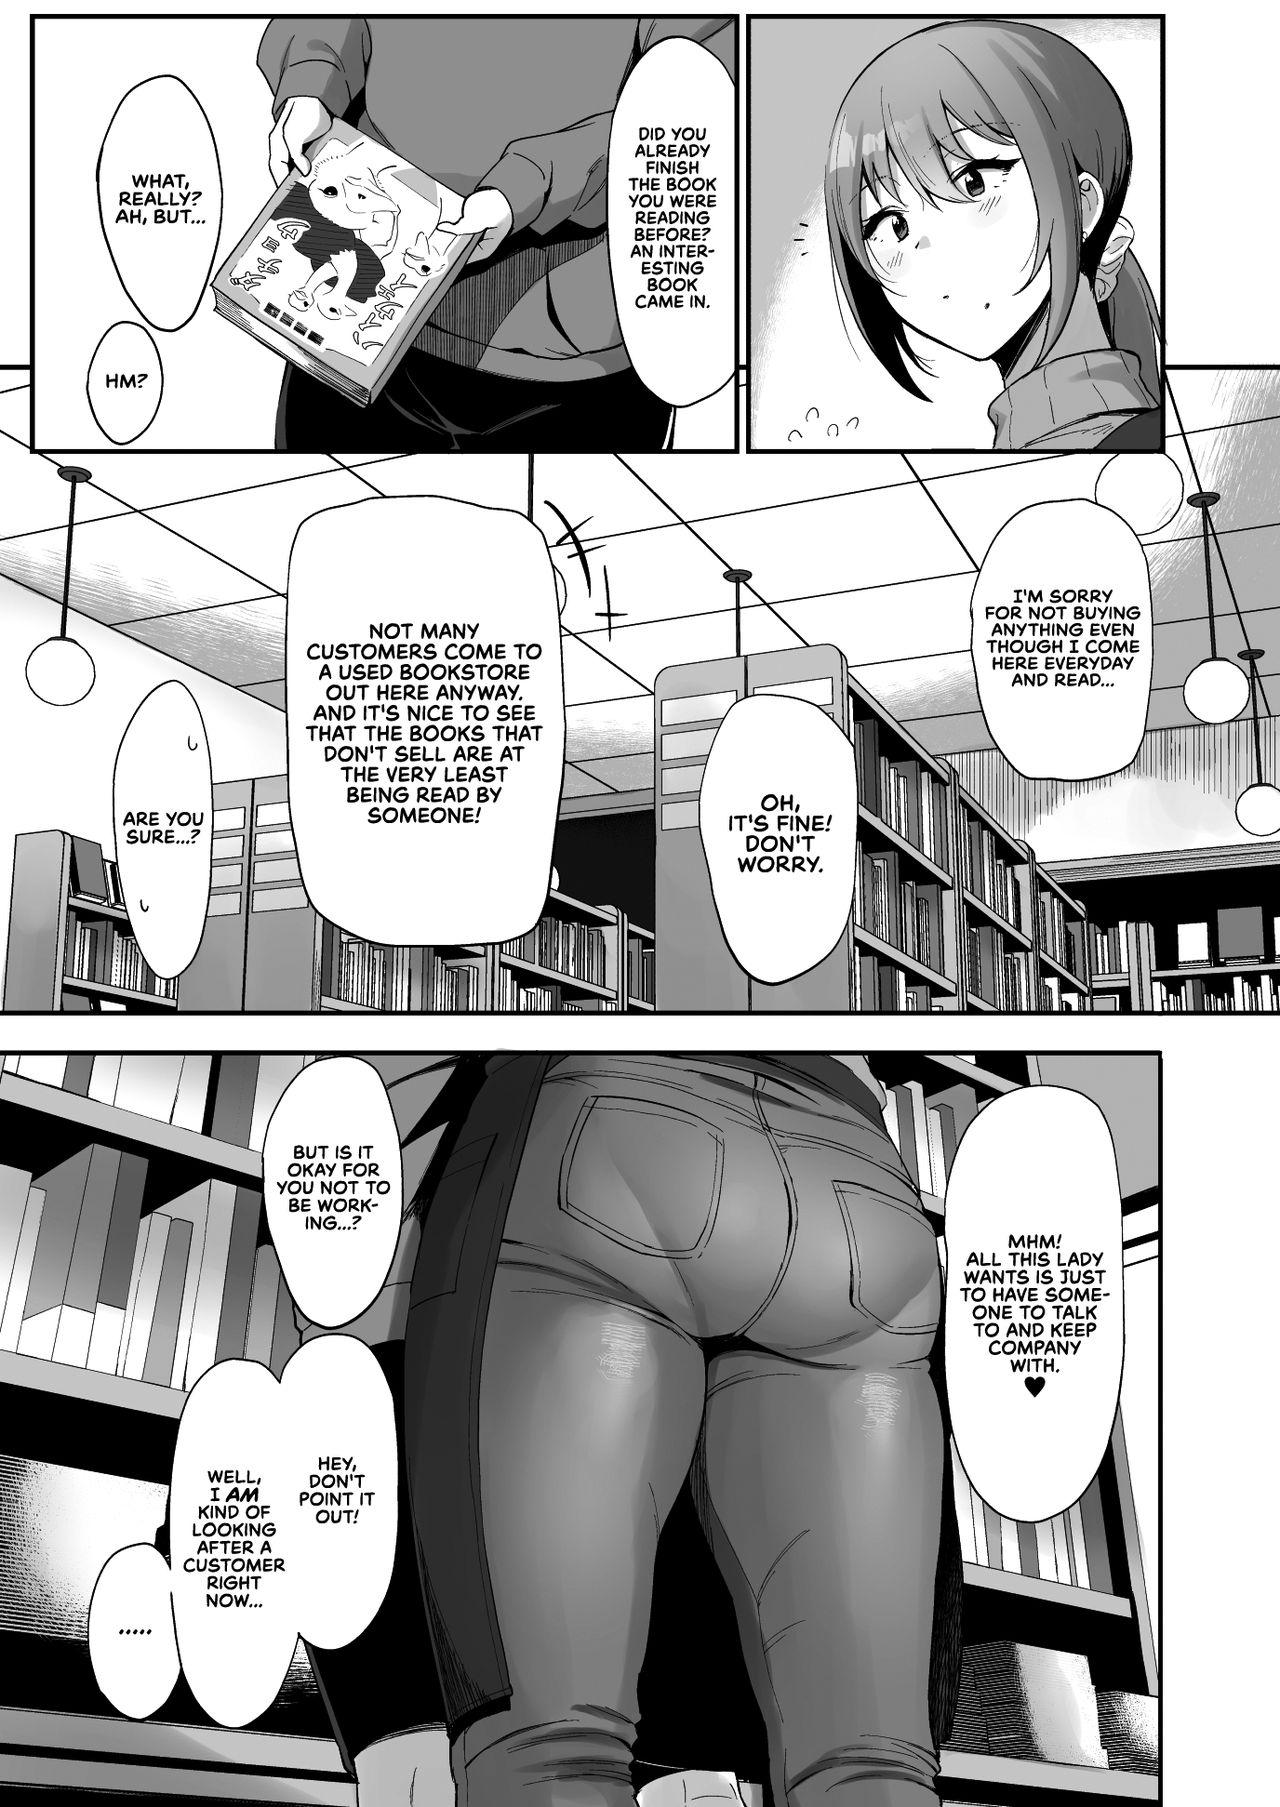 Corno Furuhonya no Onee-san to | With The Lady From The Used Book Shop - Original Ethnic - Page 6